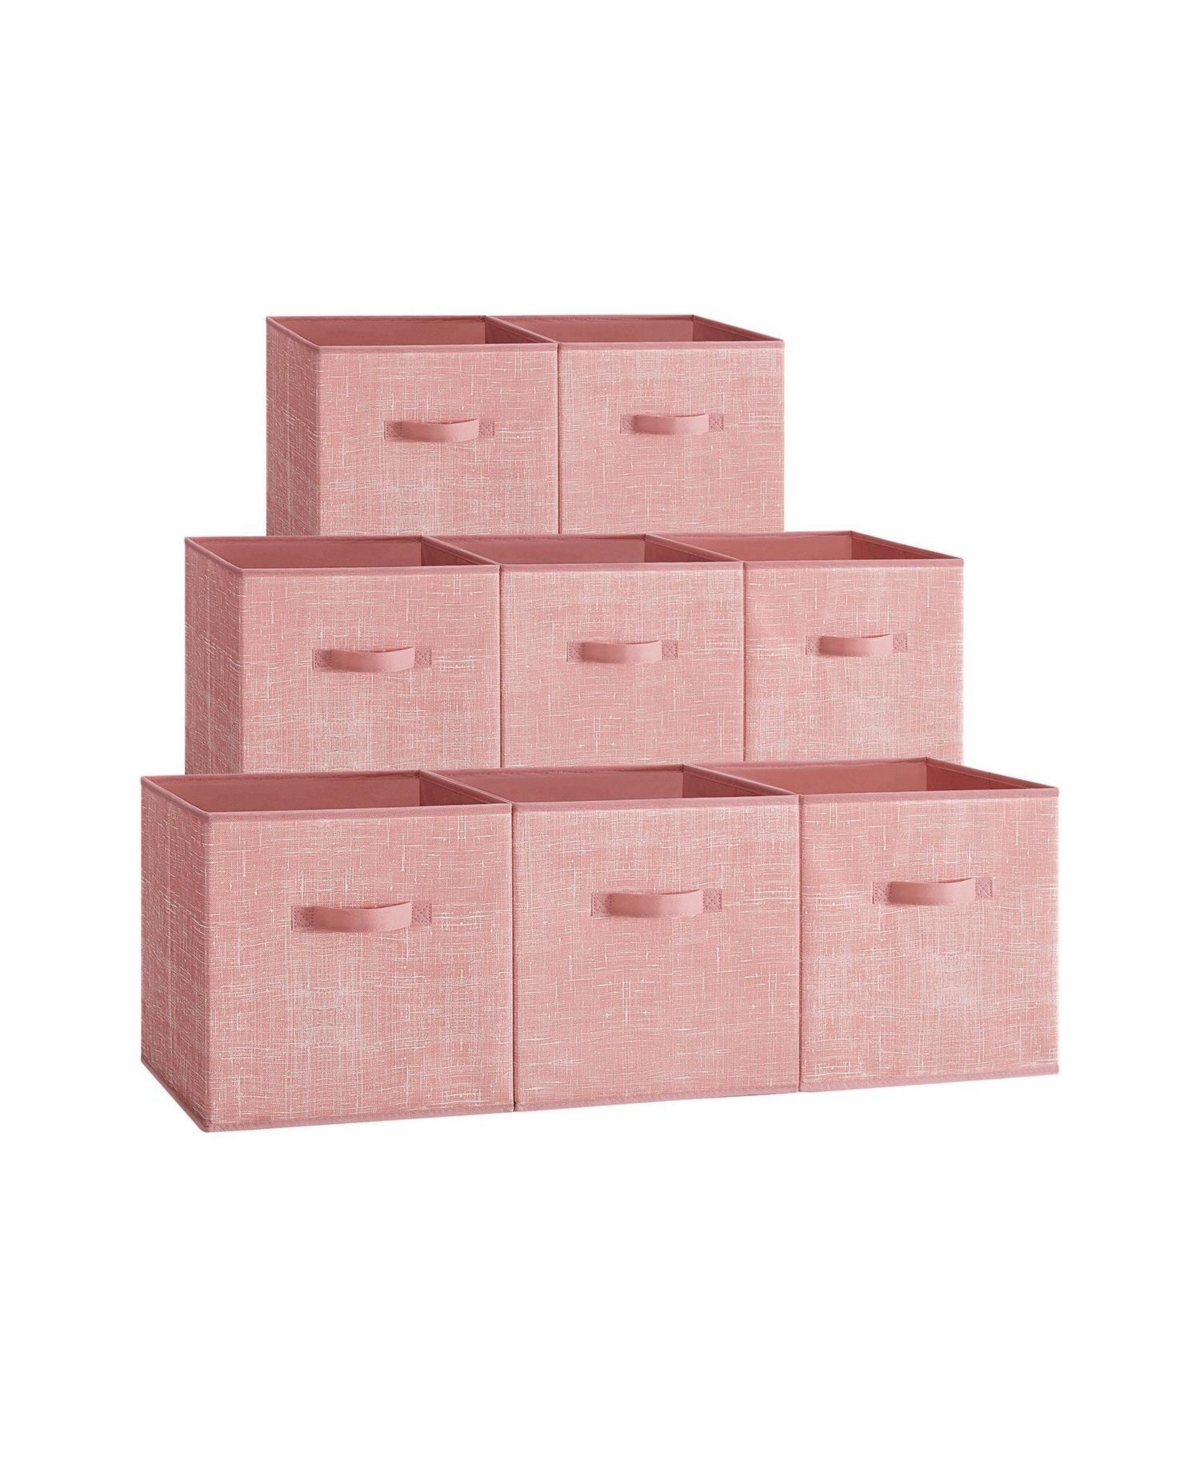 Storage Cubes, Non-Woven Fabric Bins with Double Handles, Set of 8, Closet Organizers for Shelves, Foldable, for Clothes - Pink